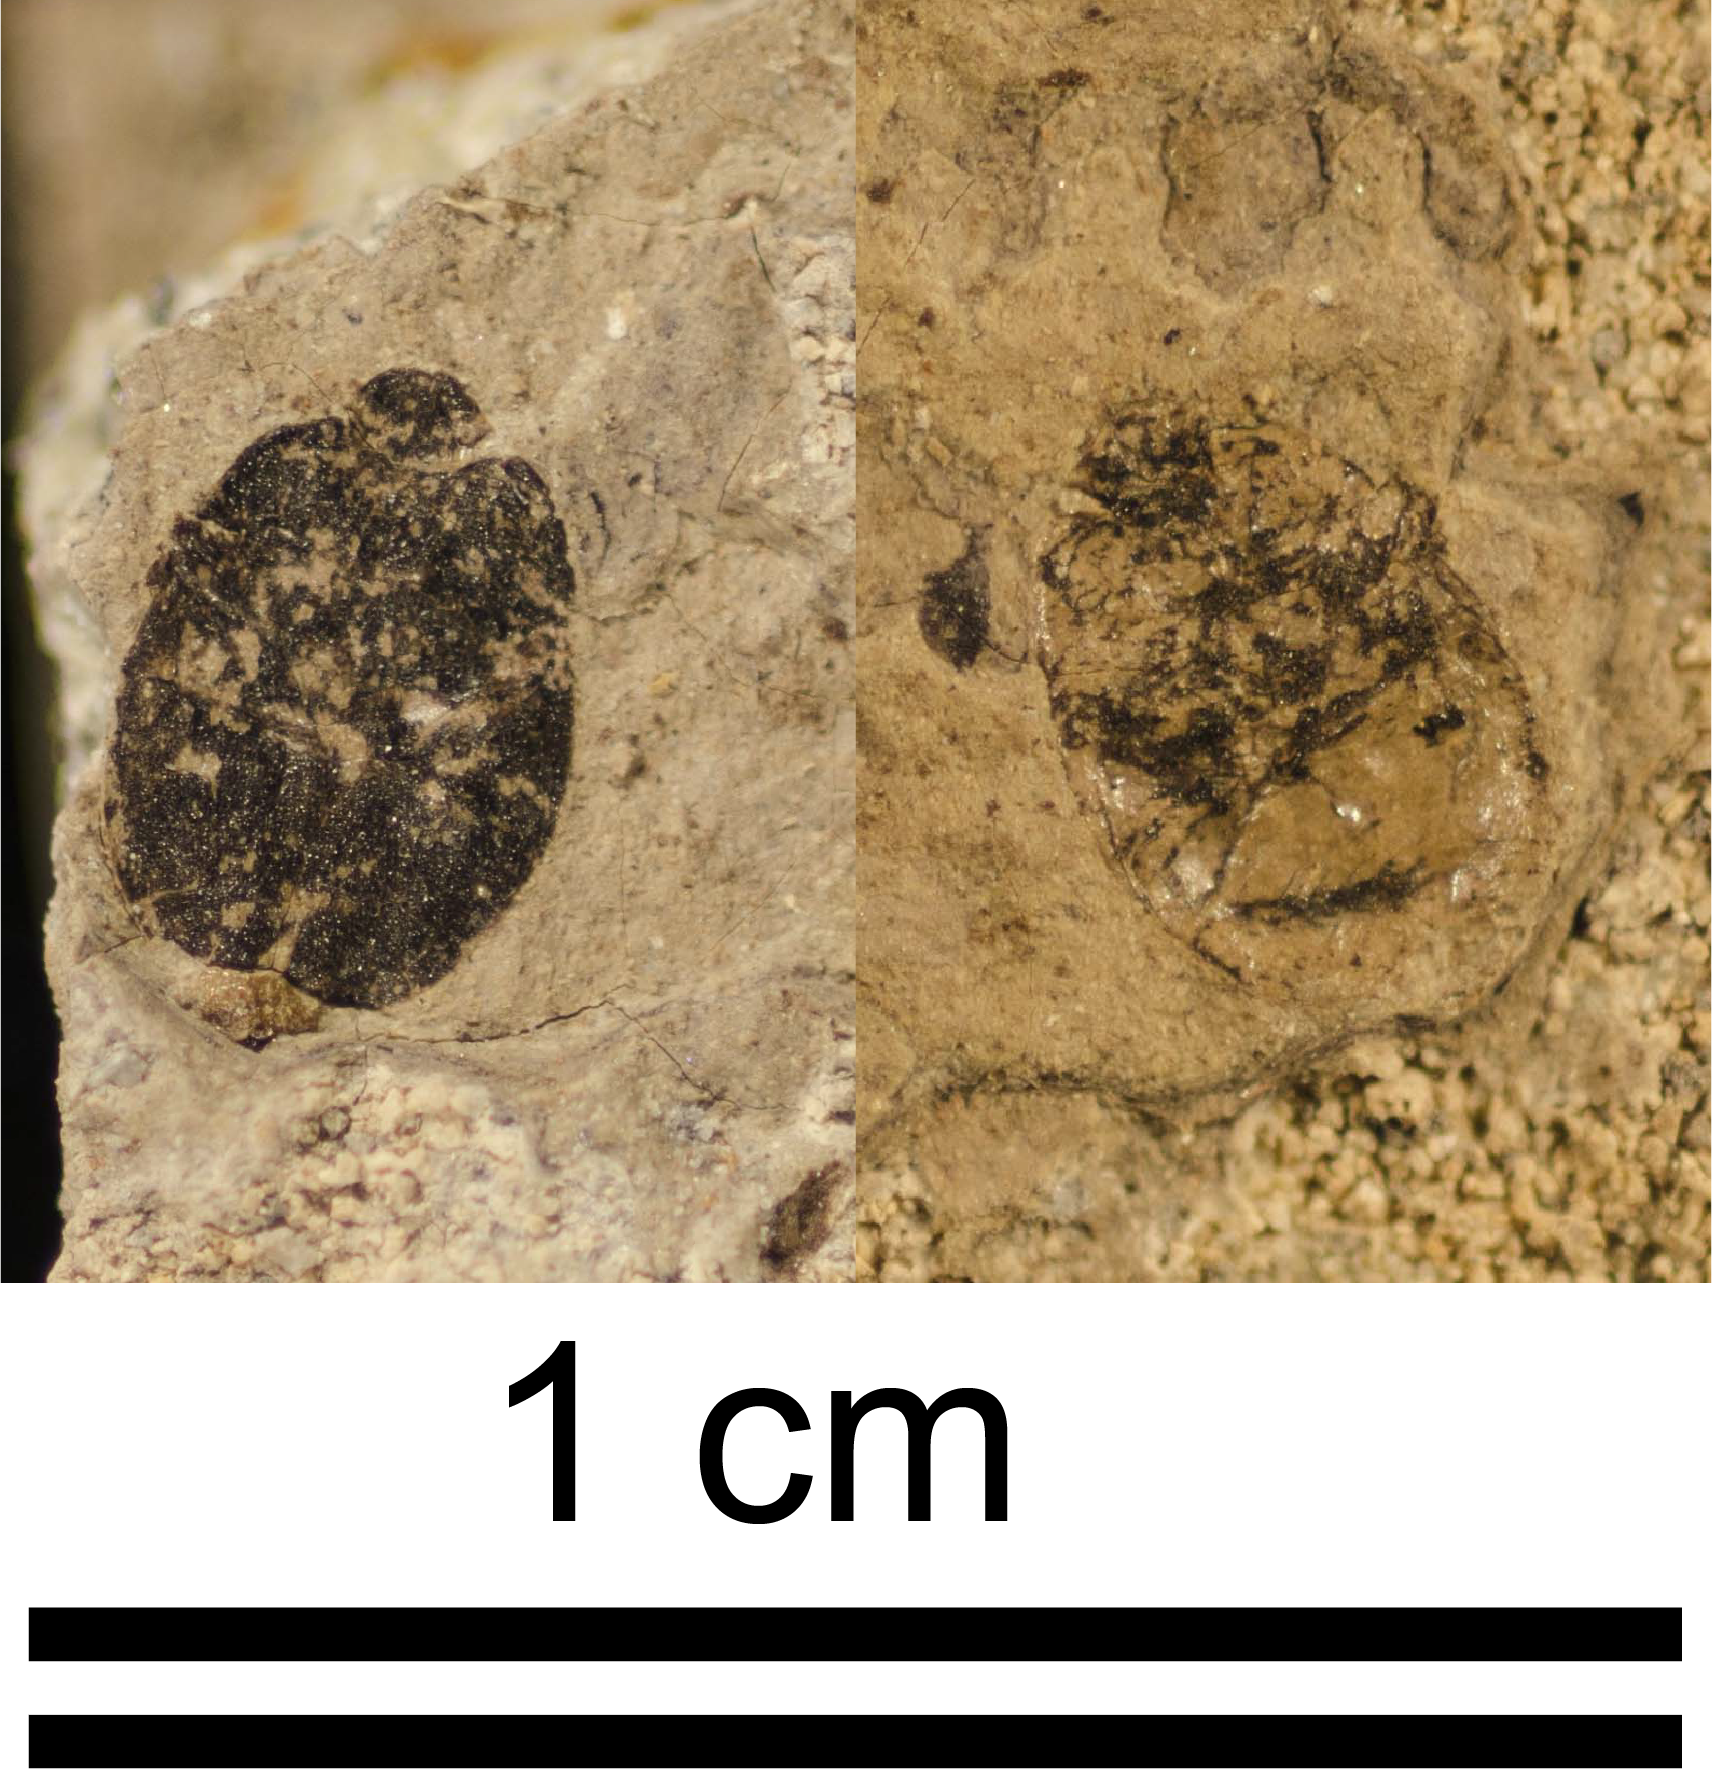 Two halves of a beetle fossil side by side showing the beetles back on the left and it's underside and legs on the right.